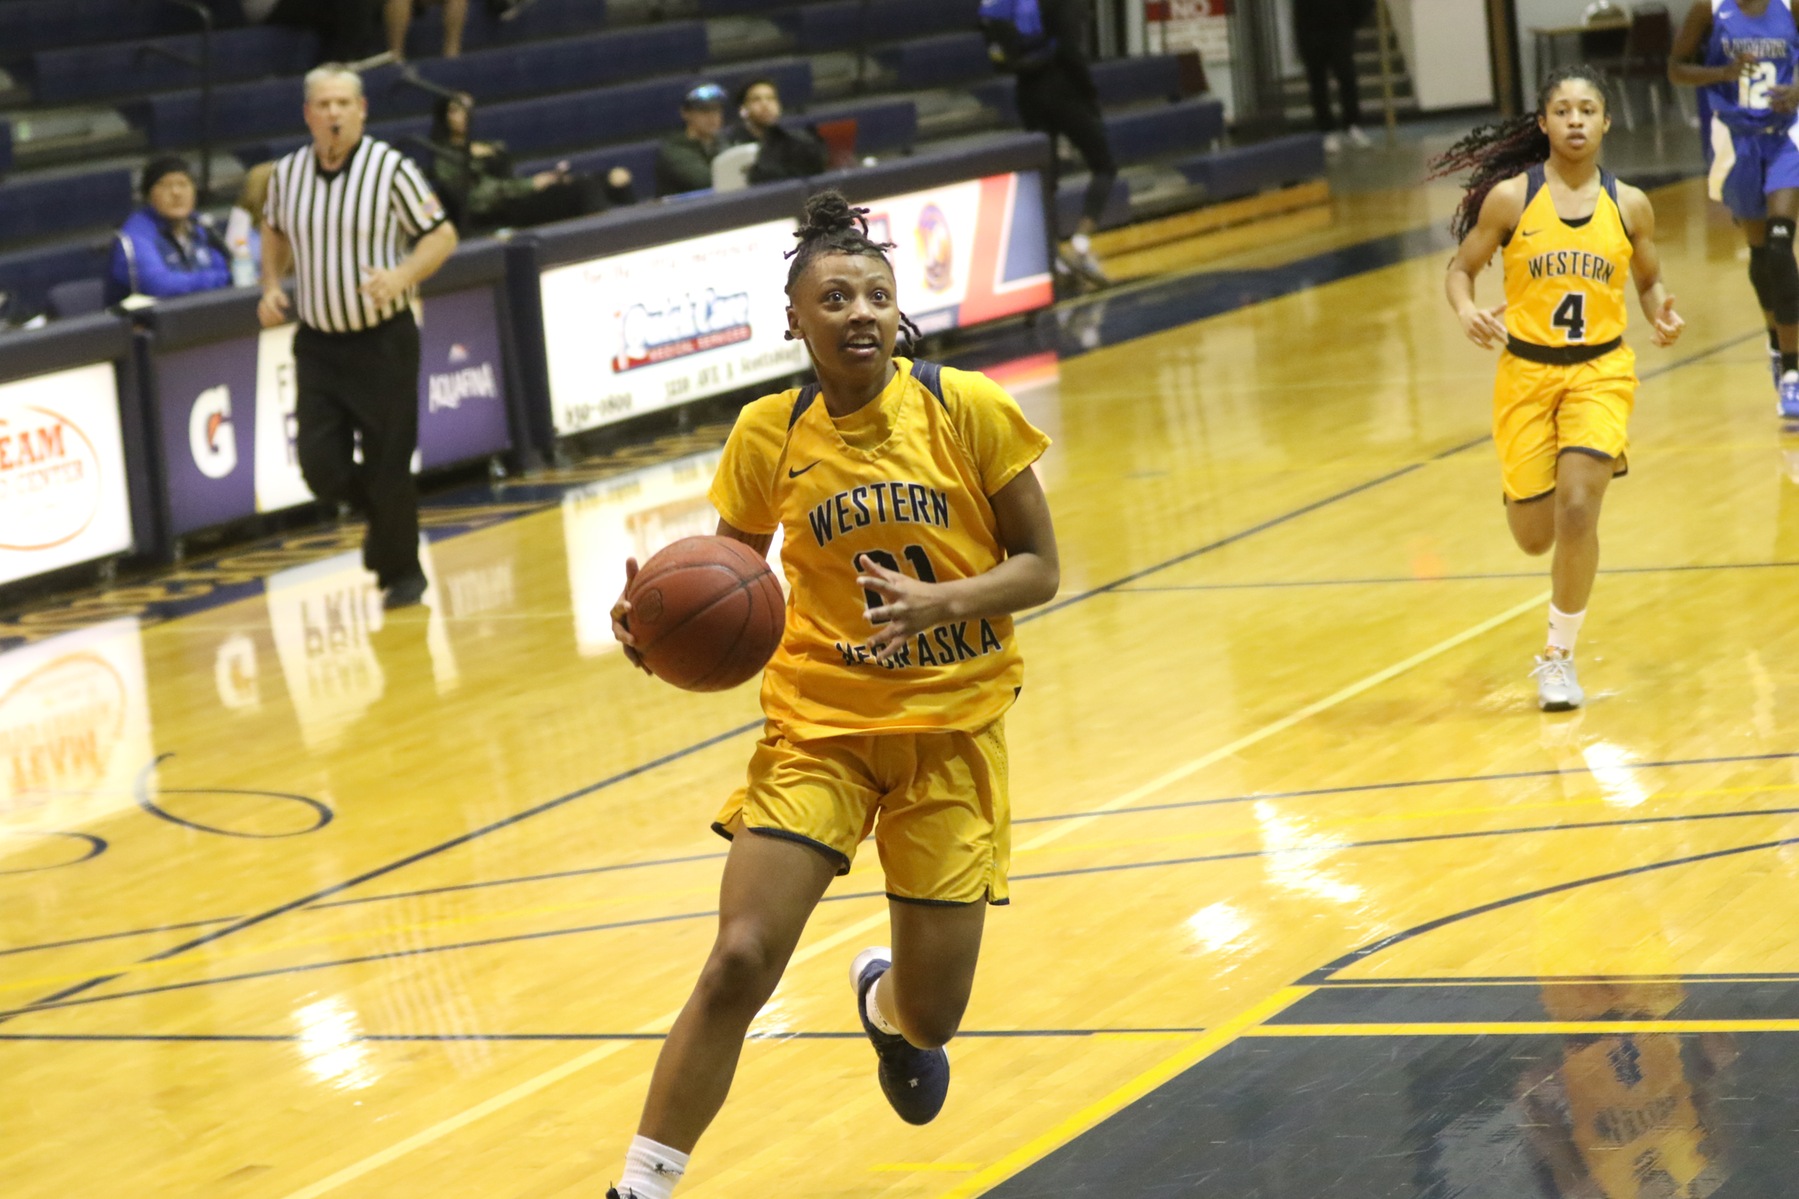 No. 6 WNCC rolls over Lamar for 16th straight win